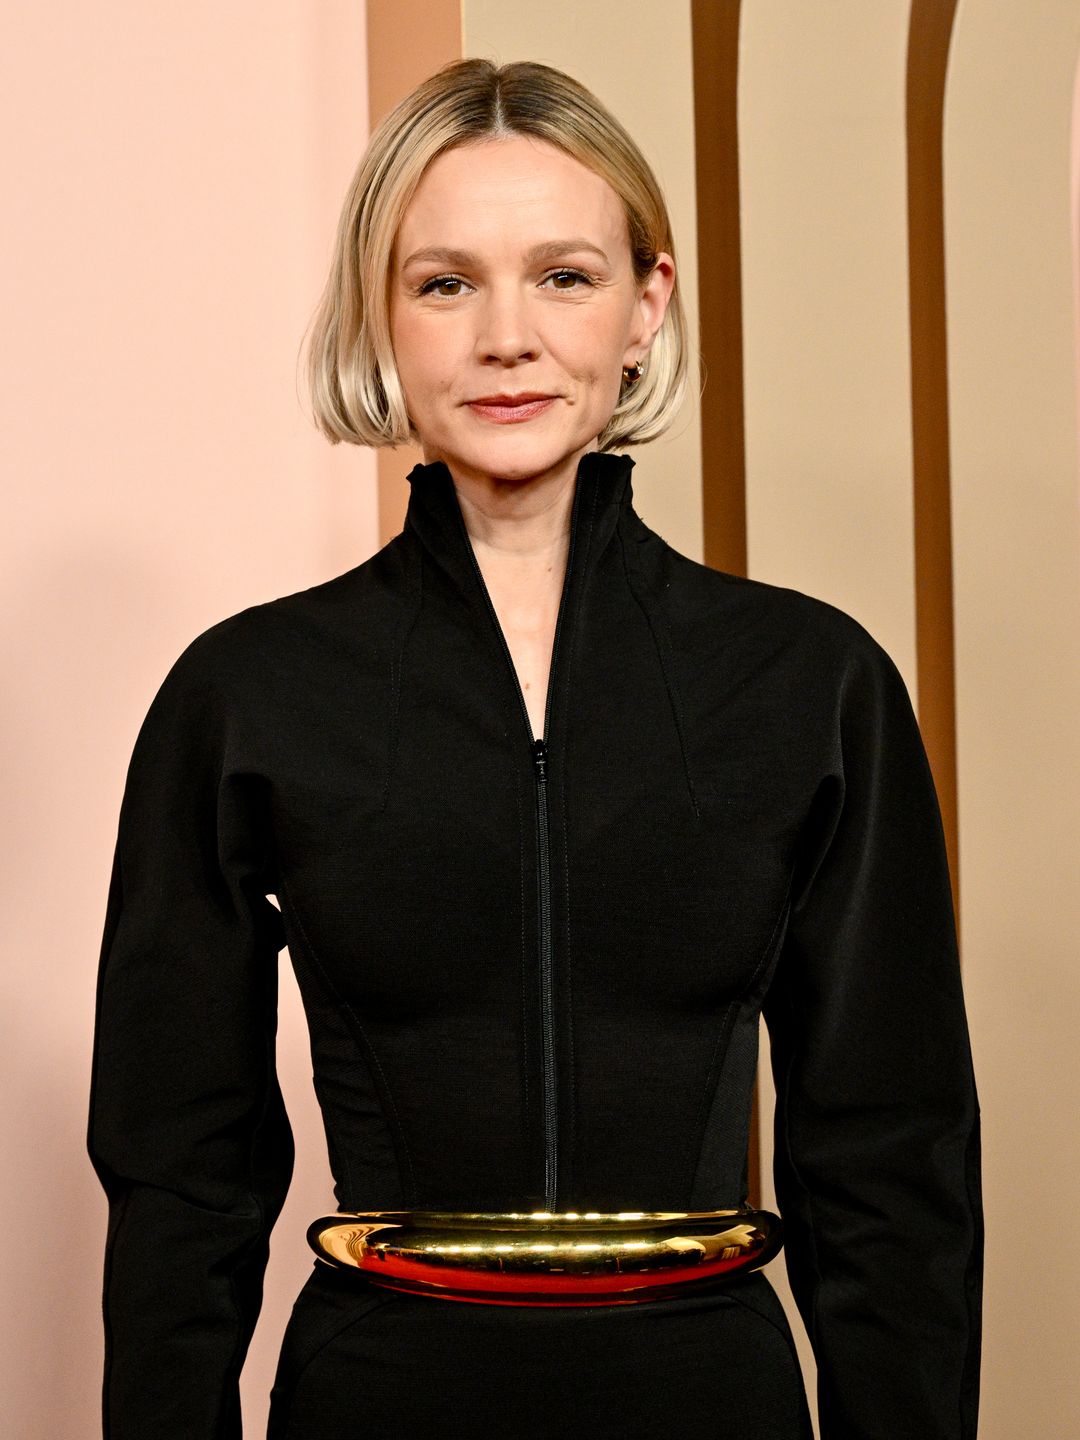 Carey Mulligan wearing a black high-necked dress at the 96th Oscars Nominee Luncheon